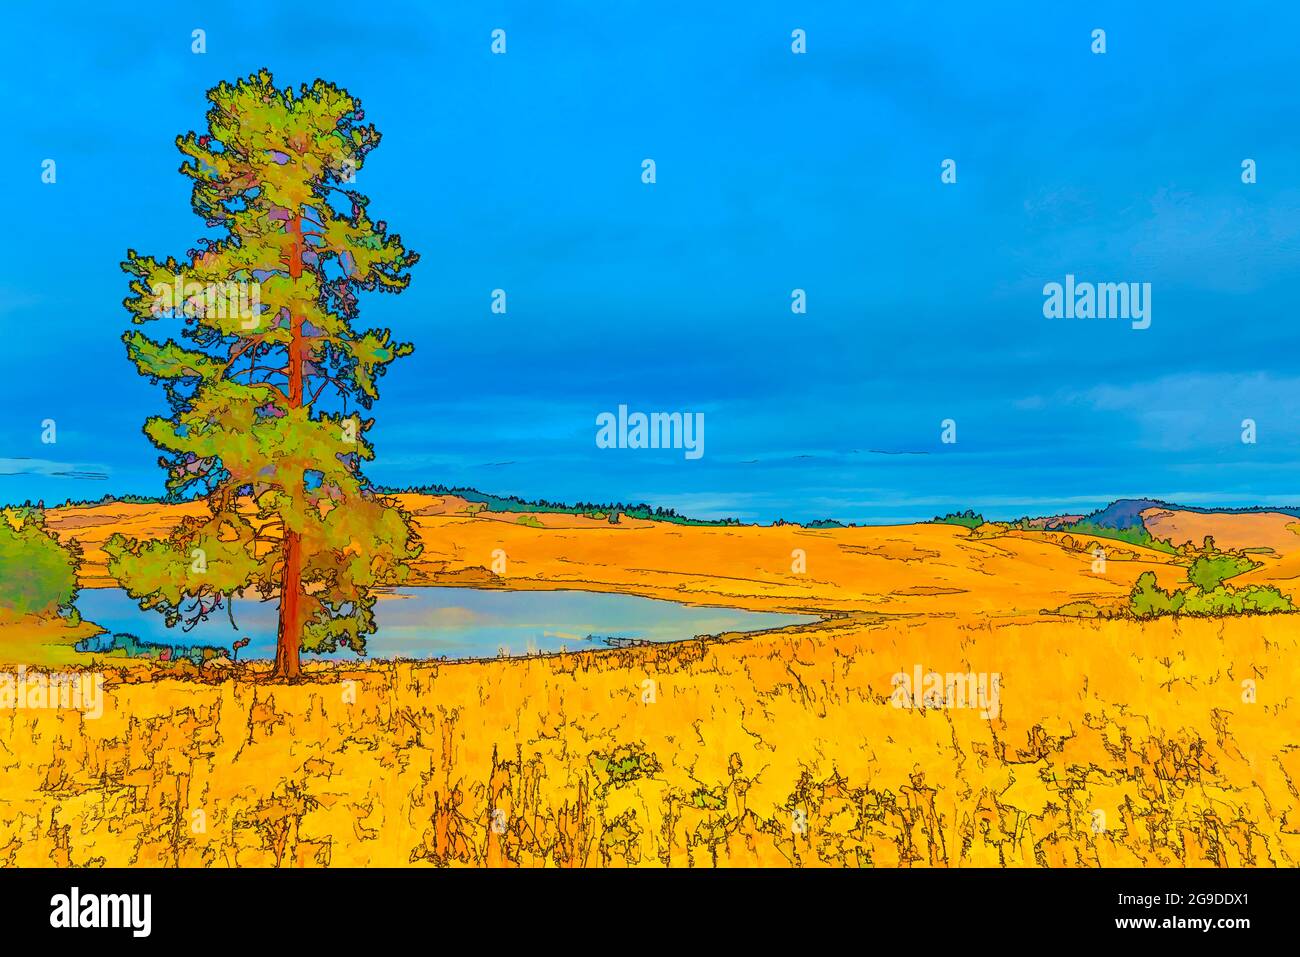 A pond in the middle of a meadow with hills and yellow grass. Tall, slender tree by the pond, forest in the background, blue sky with clouds above. Stock Photo